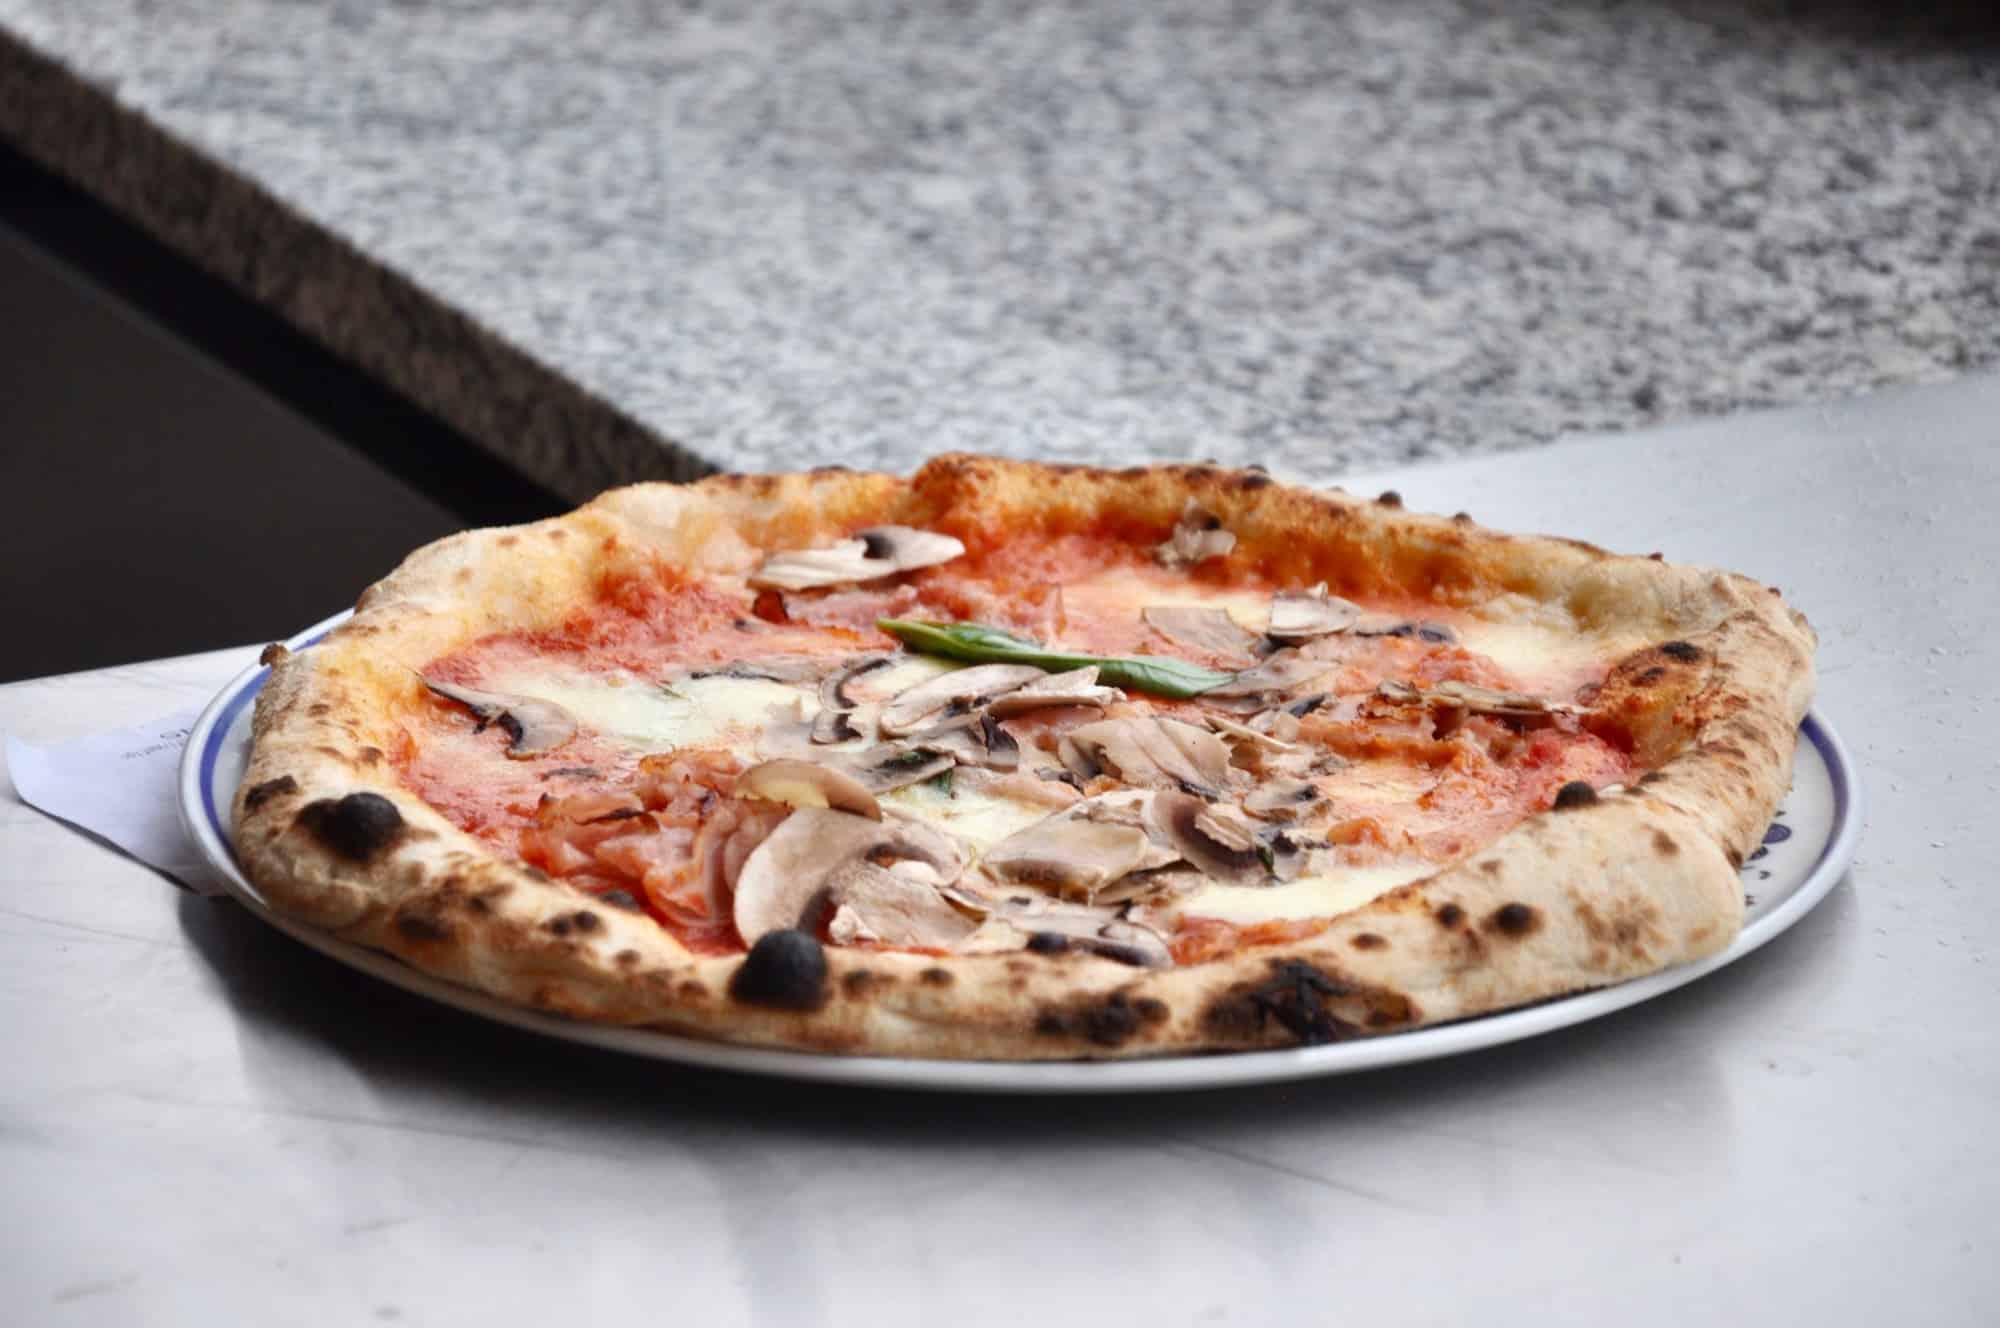 HiP Paris Blog covers the opening of the Big Mamma Group's La Felicita, which does great Italian pizza in Paris.